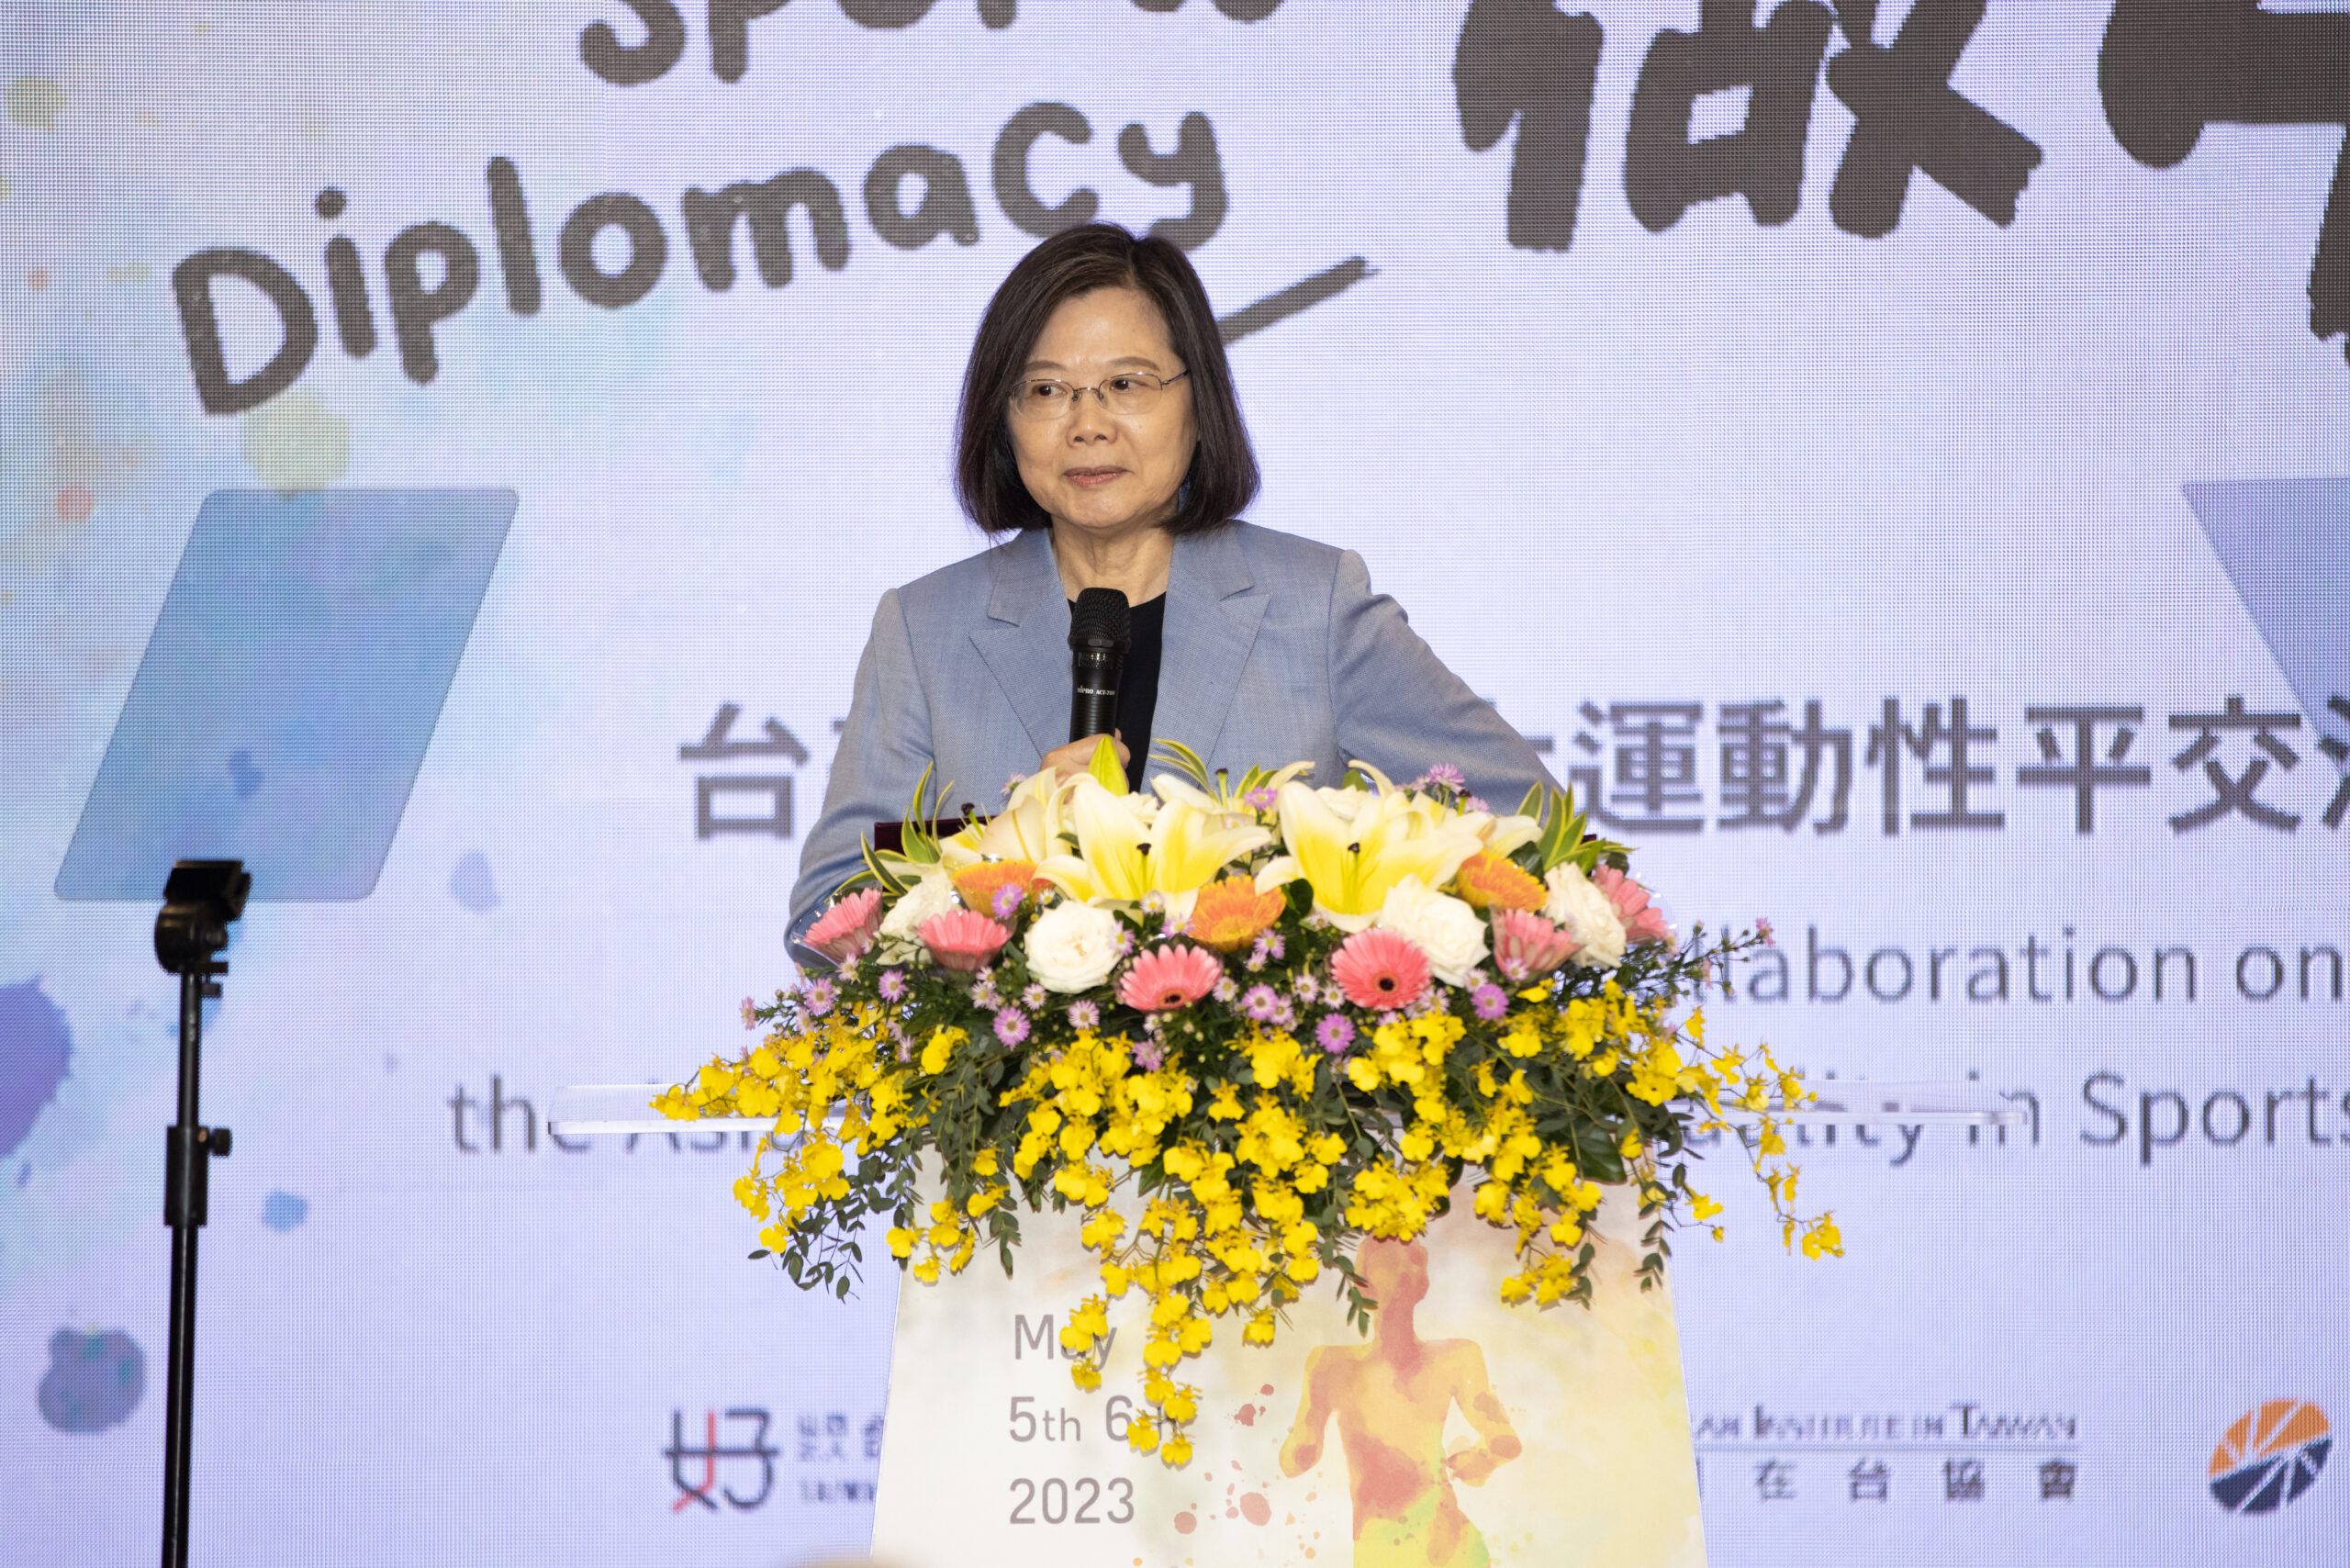 Taiwan President, Tsai Ing-wen opens the Sports as Diplomacy Conference